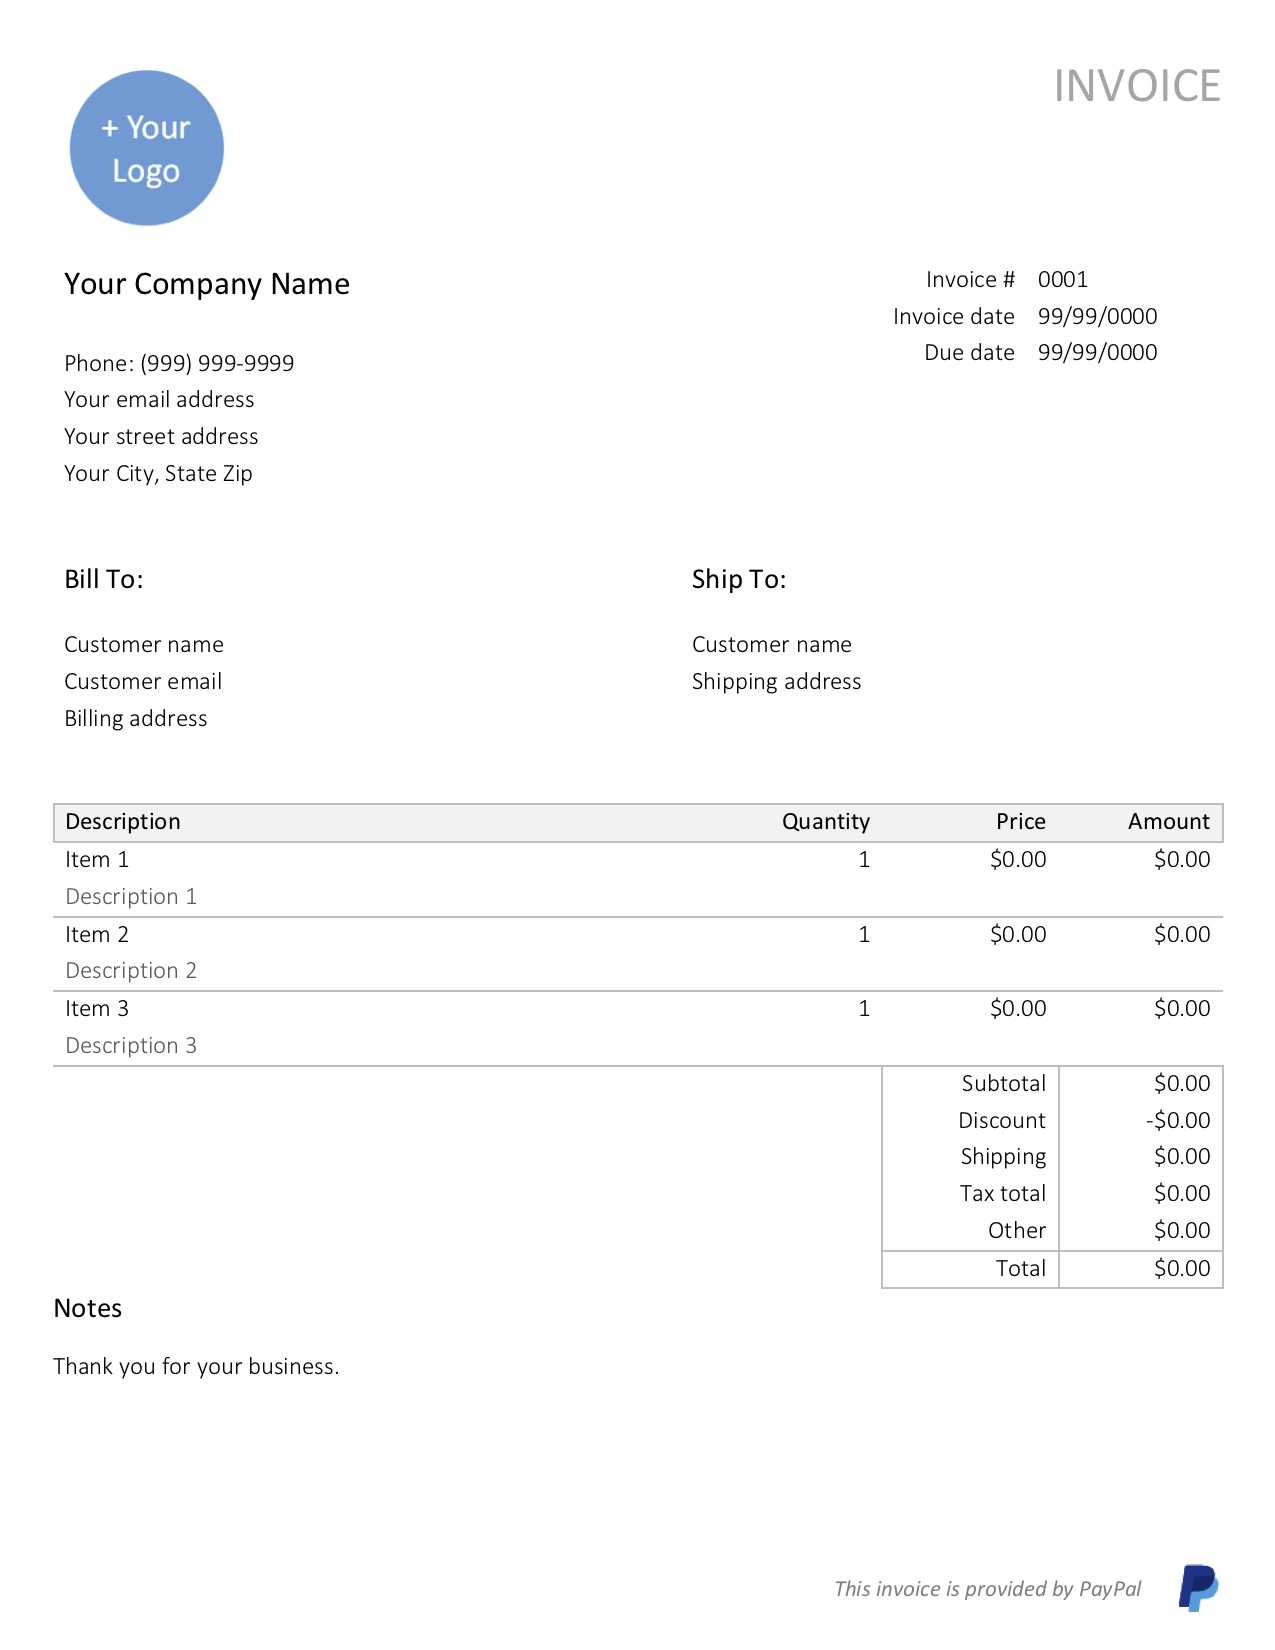 Free, Downloadable Sample Invoice Template | Paypal Throughout Credit Card Bill Template